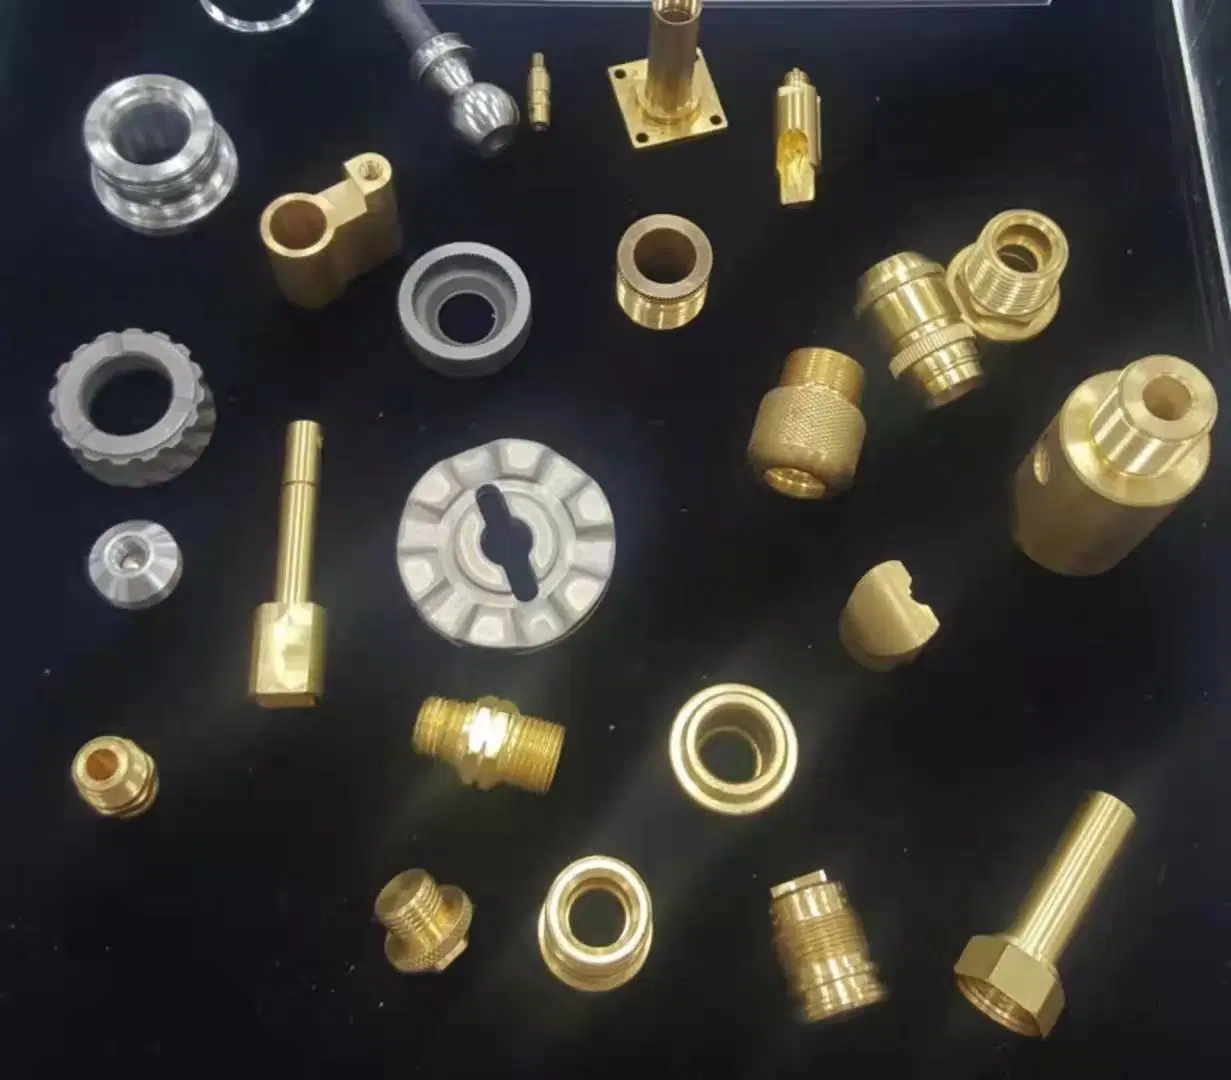 OEM Aluminum/Brass/Copper/Stainless Steel/Iron/Titanium Alloy/Plastic CNC Machining (Turning, Milling, Drilling, Tapping, Grinding) Sports Equipment Accessories